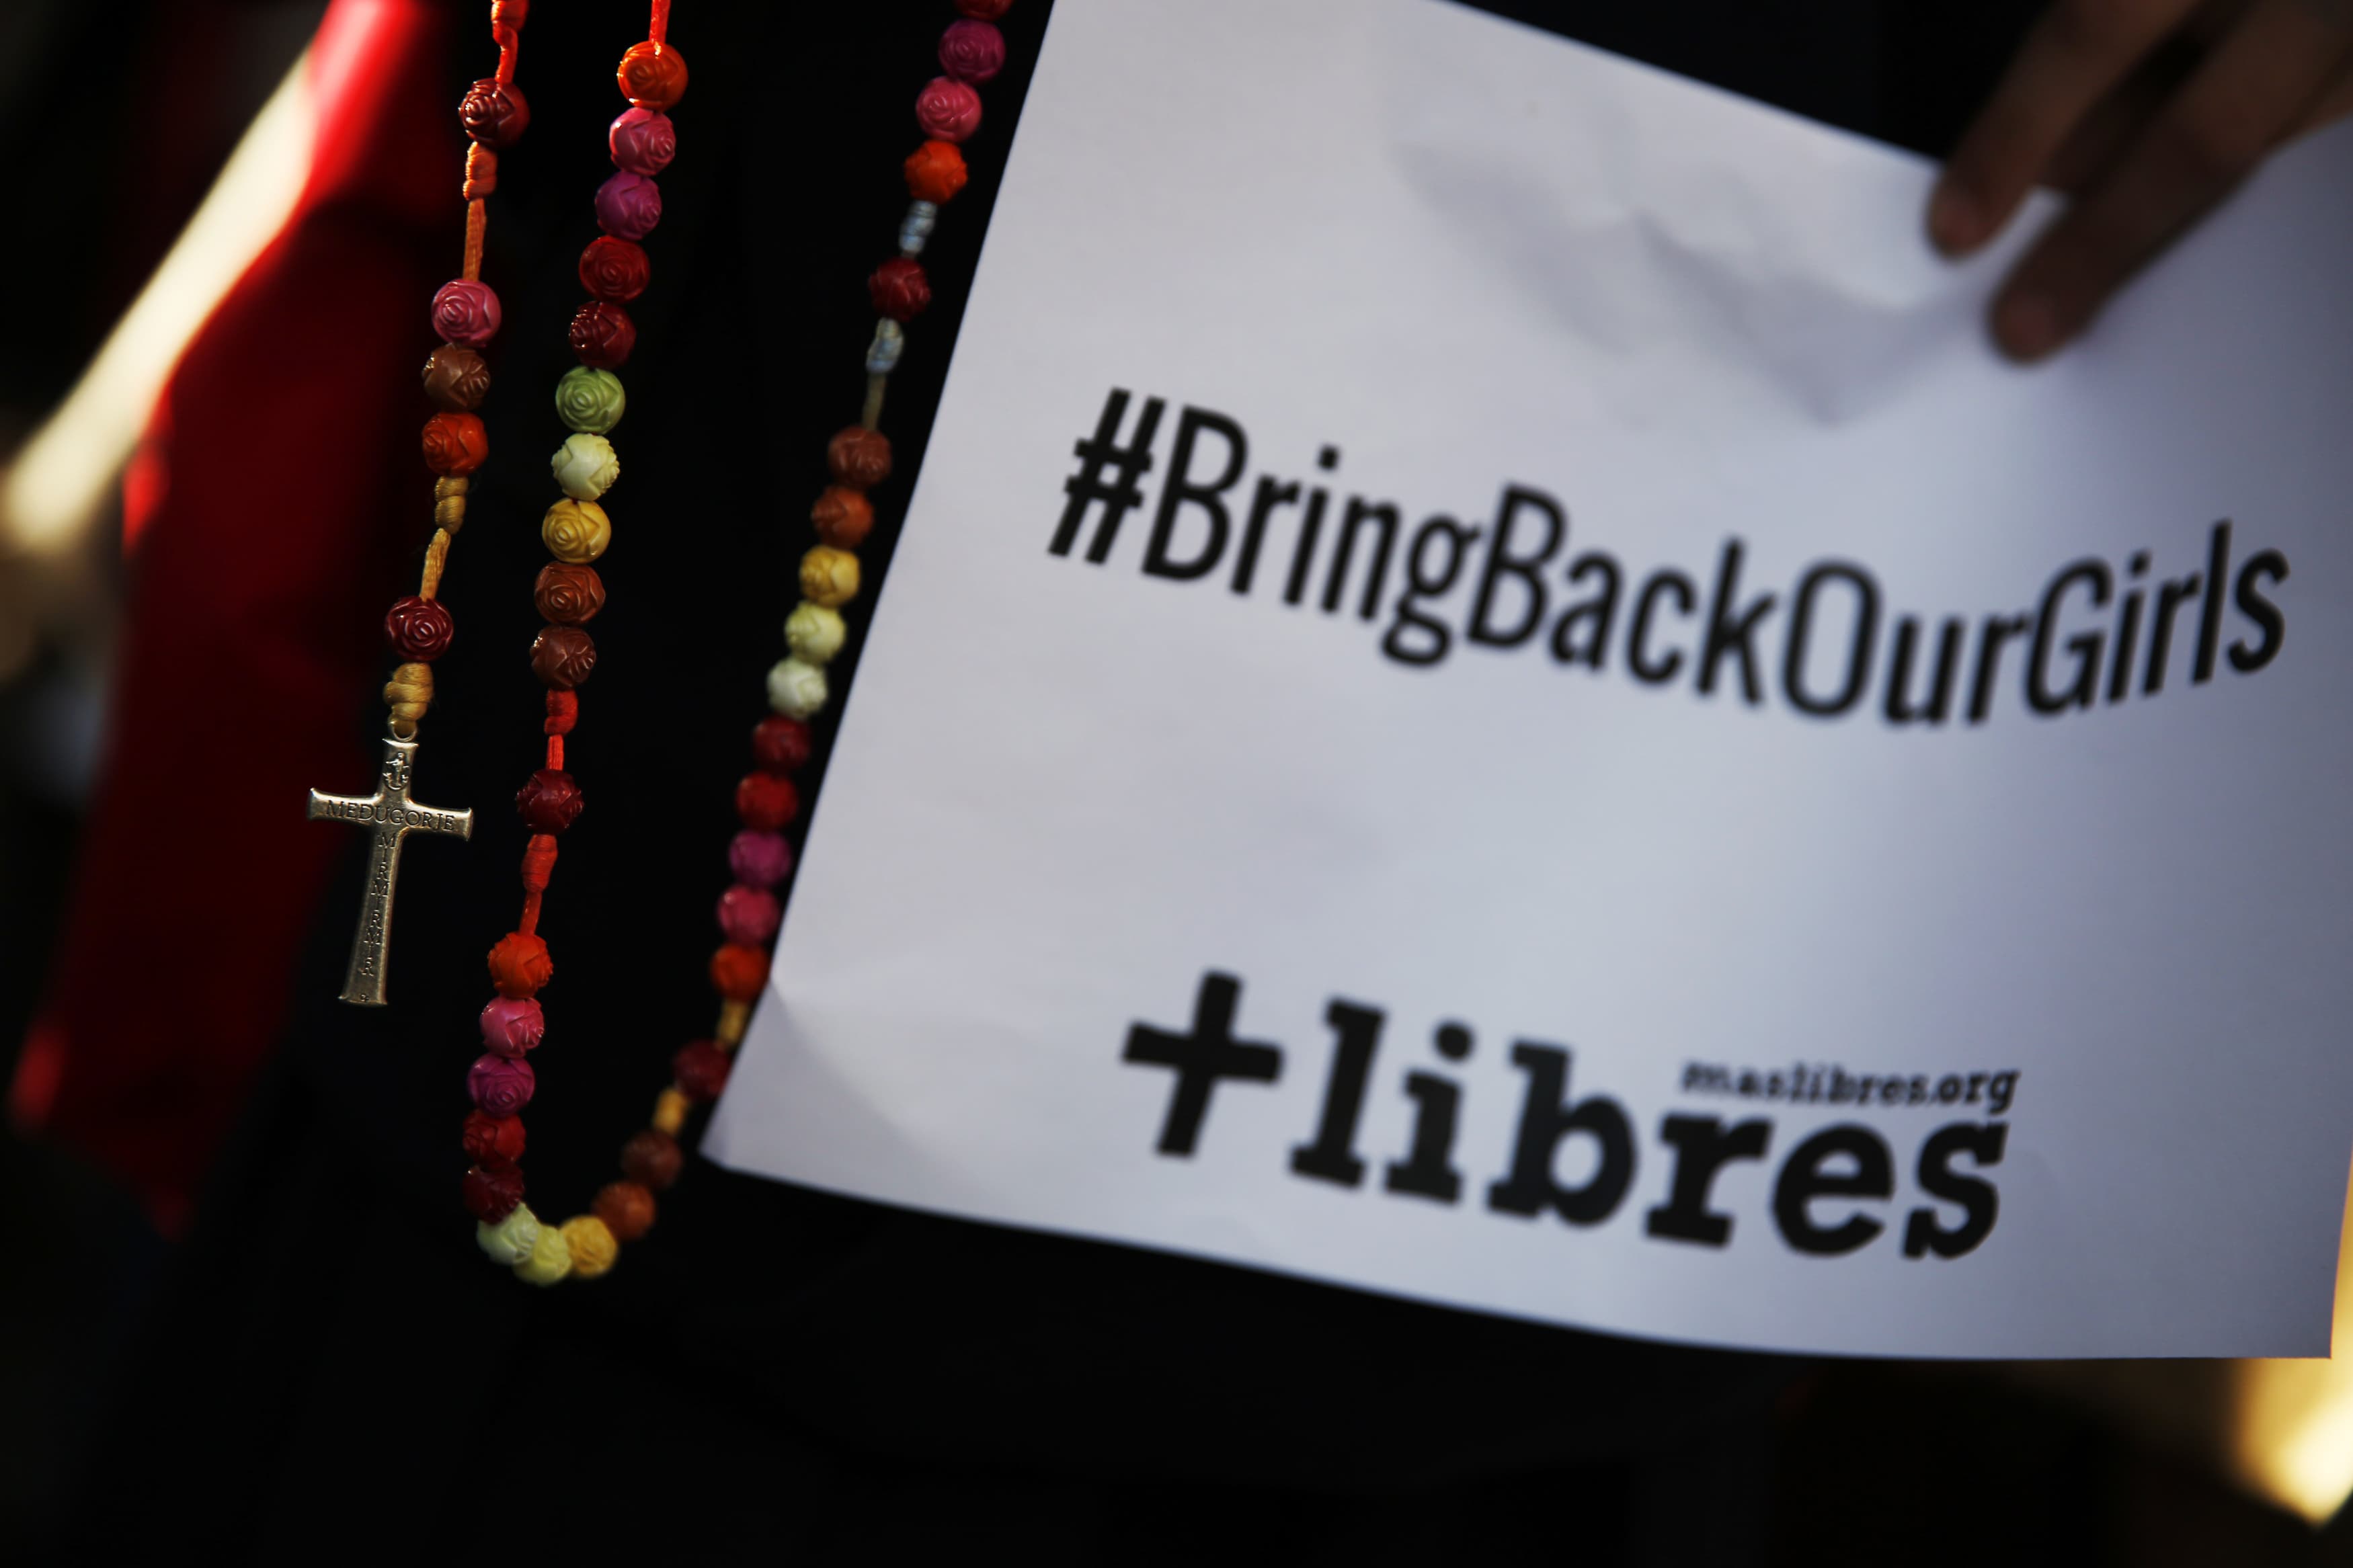 A poster with the Twitter campaign hashtag #BringBackOurGirls is seen during a prayer vigil showing support for Nigerian schoolgirls abducted by militant group Boko Haram, outside the Nigerian Embassy in Madrid May 22, 2014, REUTERS/Susana Vera